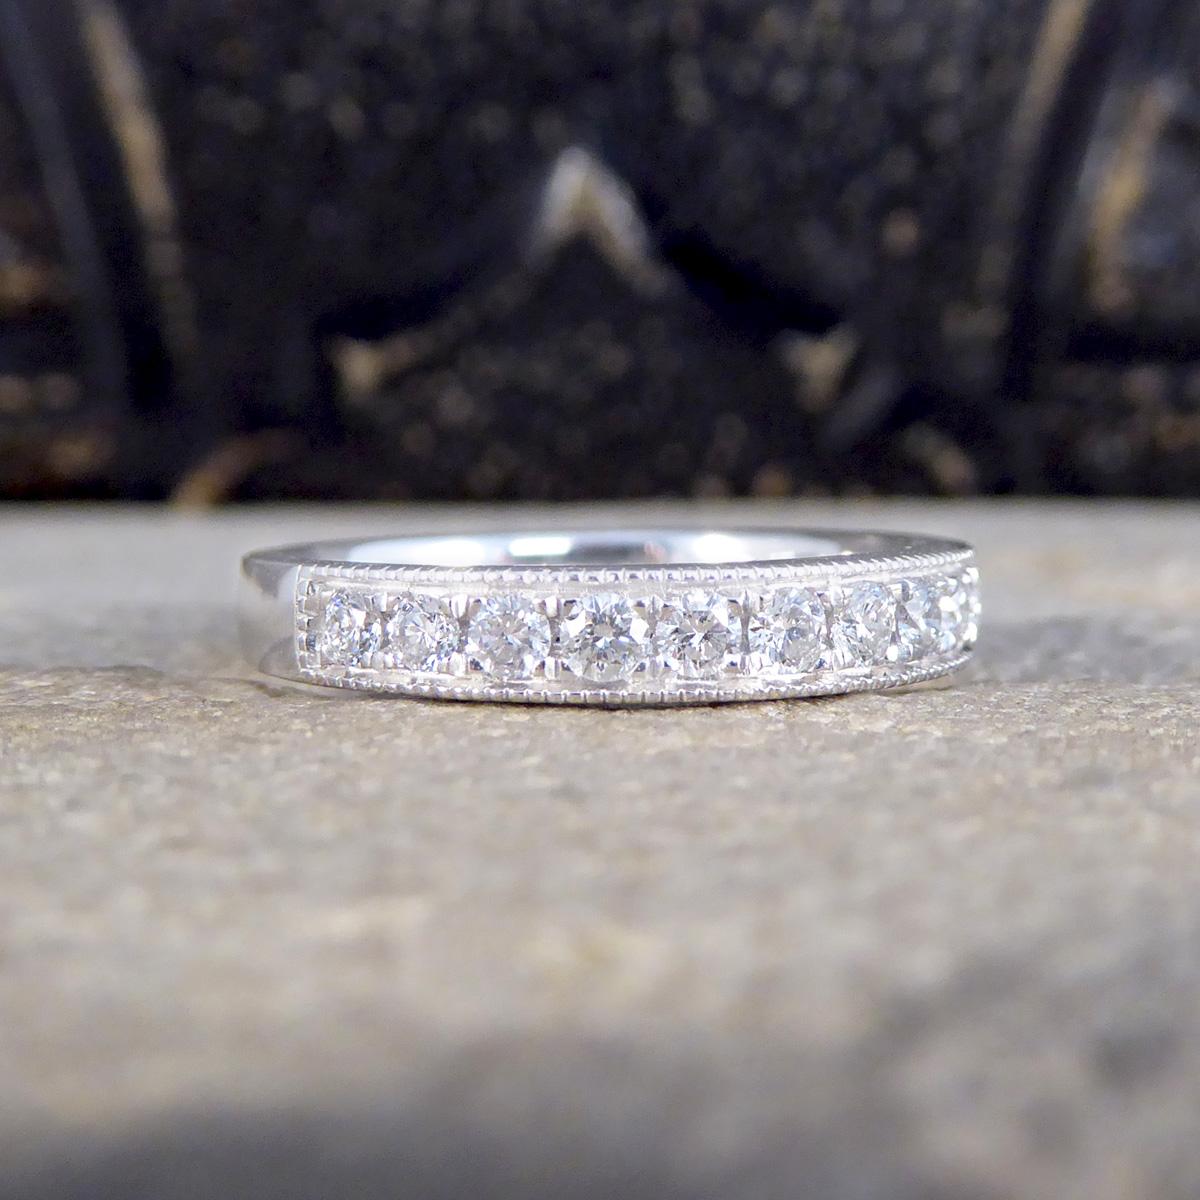 Celebrate everlasting love with our Platinum half eternity ring, featuring 0.50ct of brilliant cut diamonds. This ring is meticulously crafted from the finest platinum, known for its durability and elegant sheen, providing a perfect backdrop for the